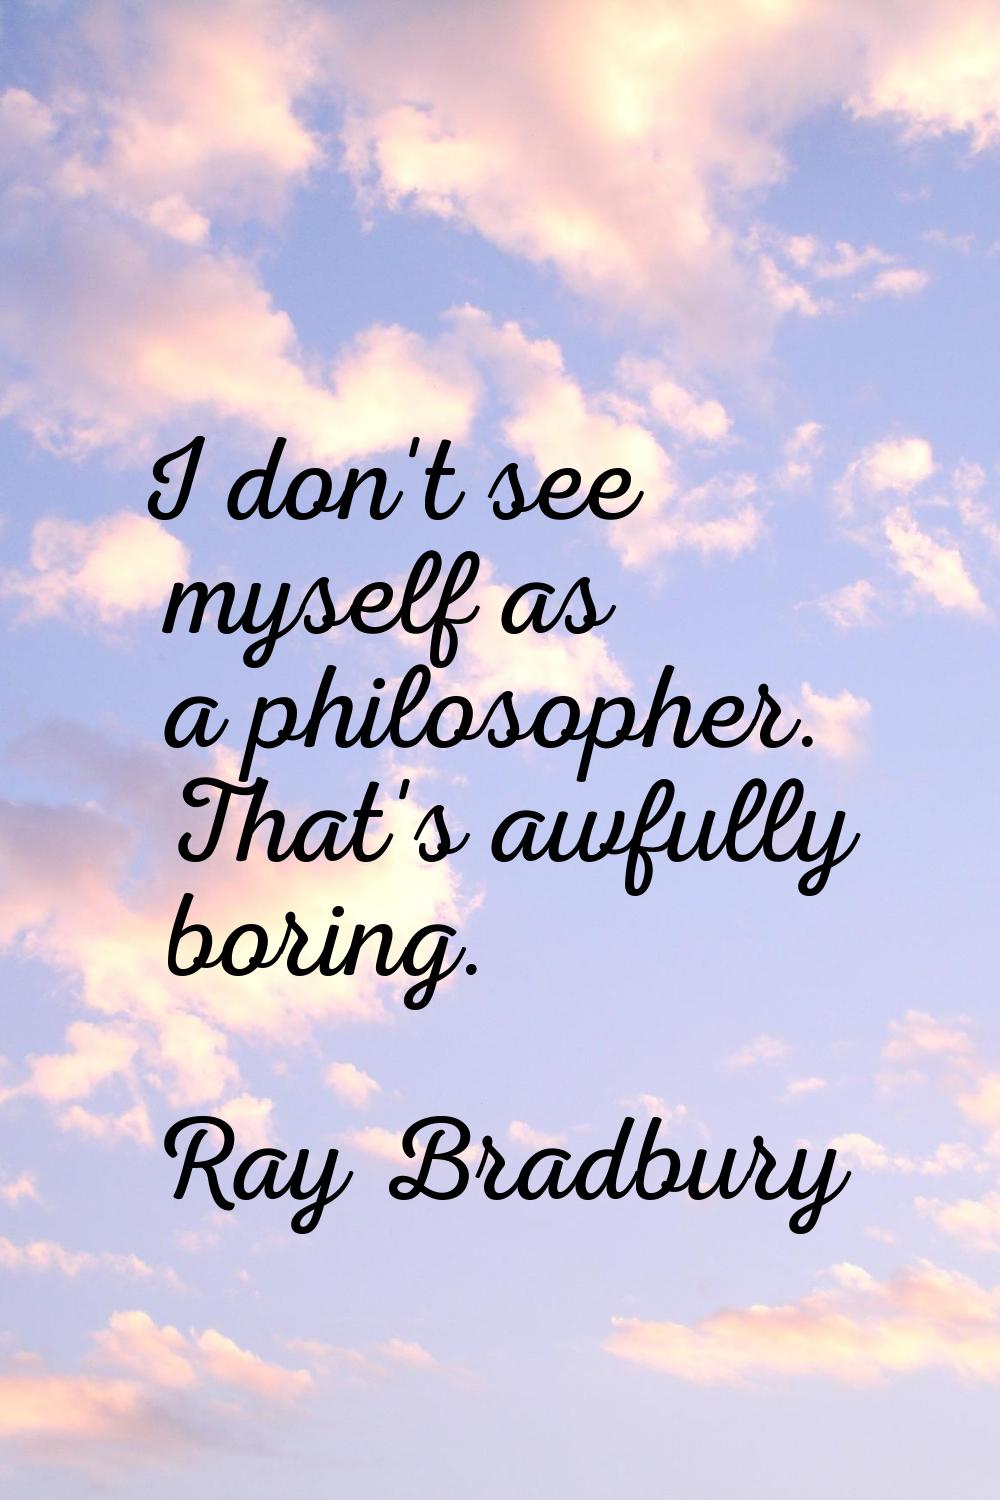 I don't see myself as a philosopher. That's awfully boring.